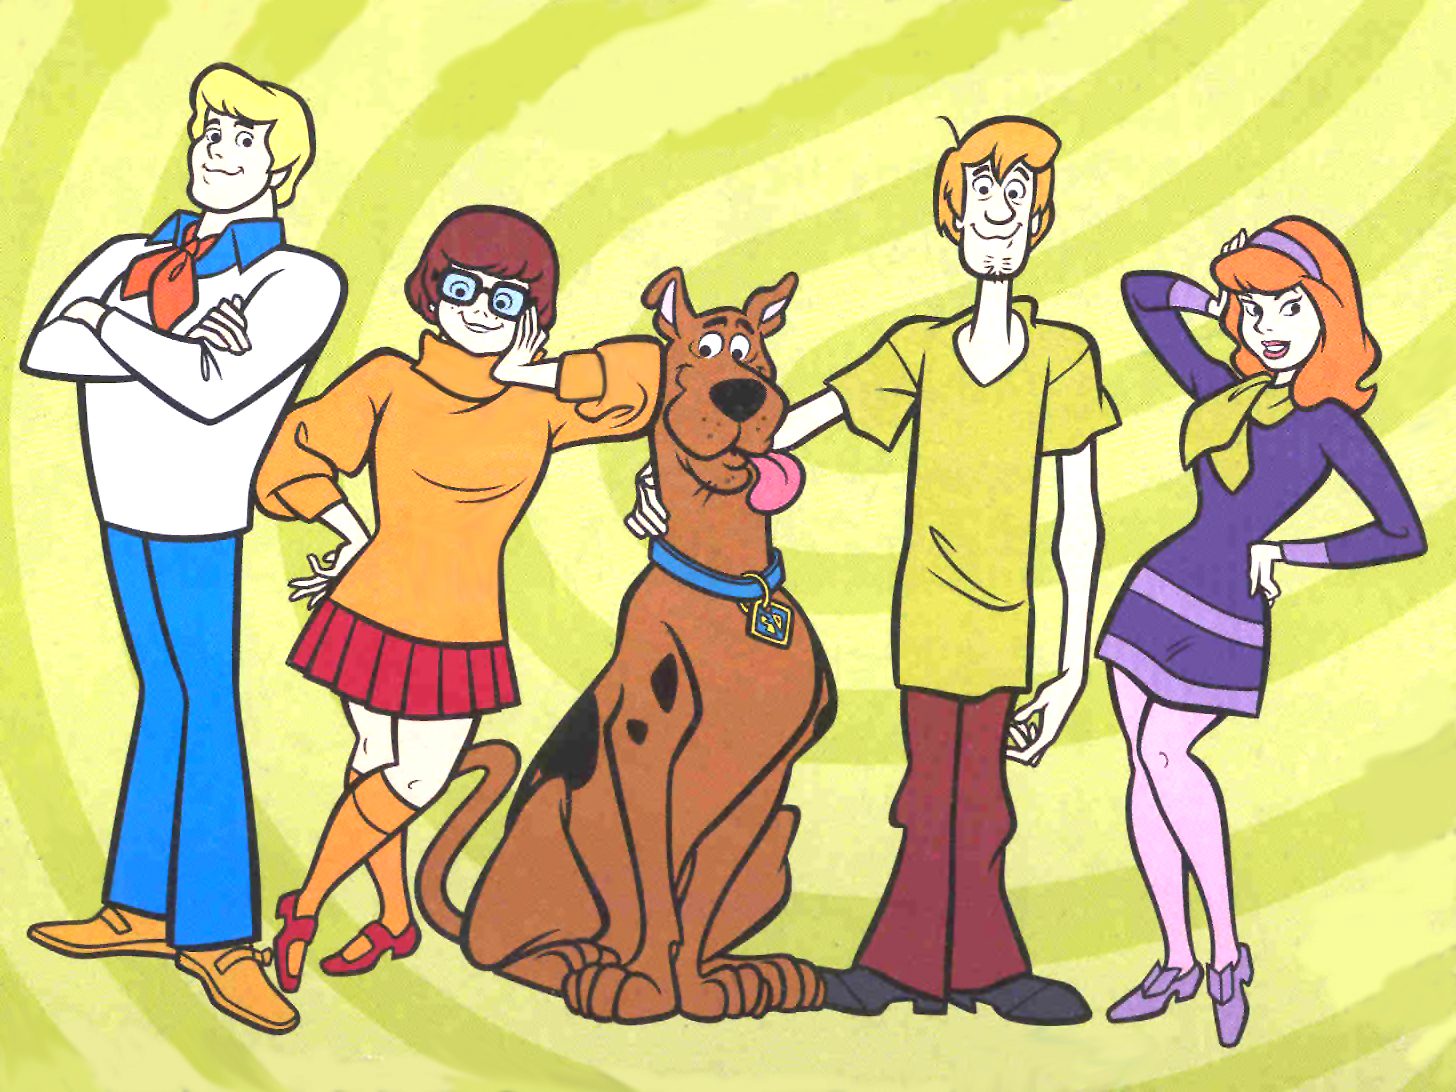 Upcoming Animated Scooby Doo Movie Will Have a Celebrity Cast